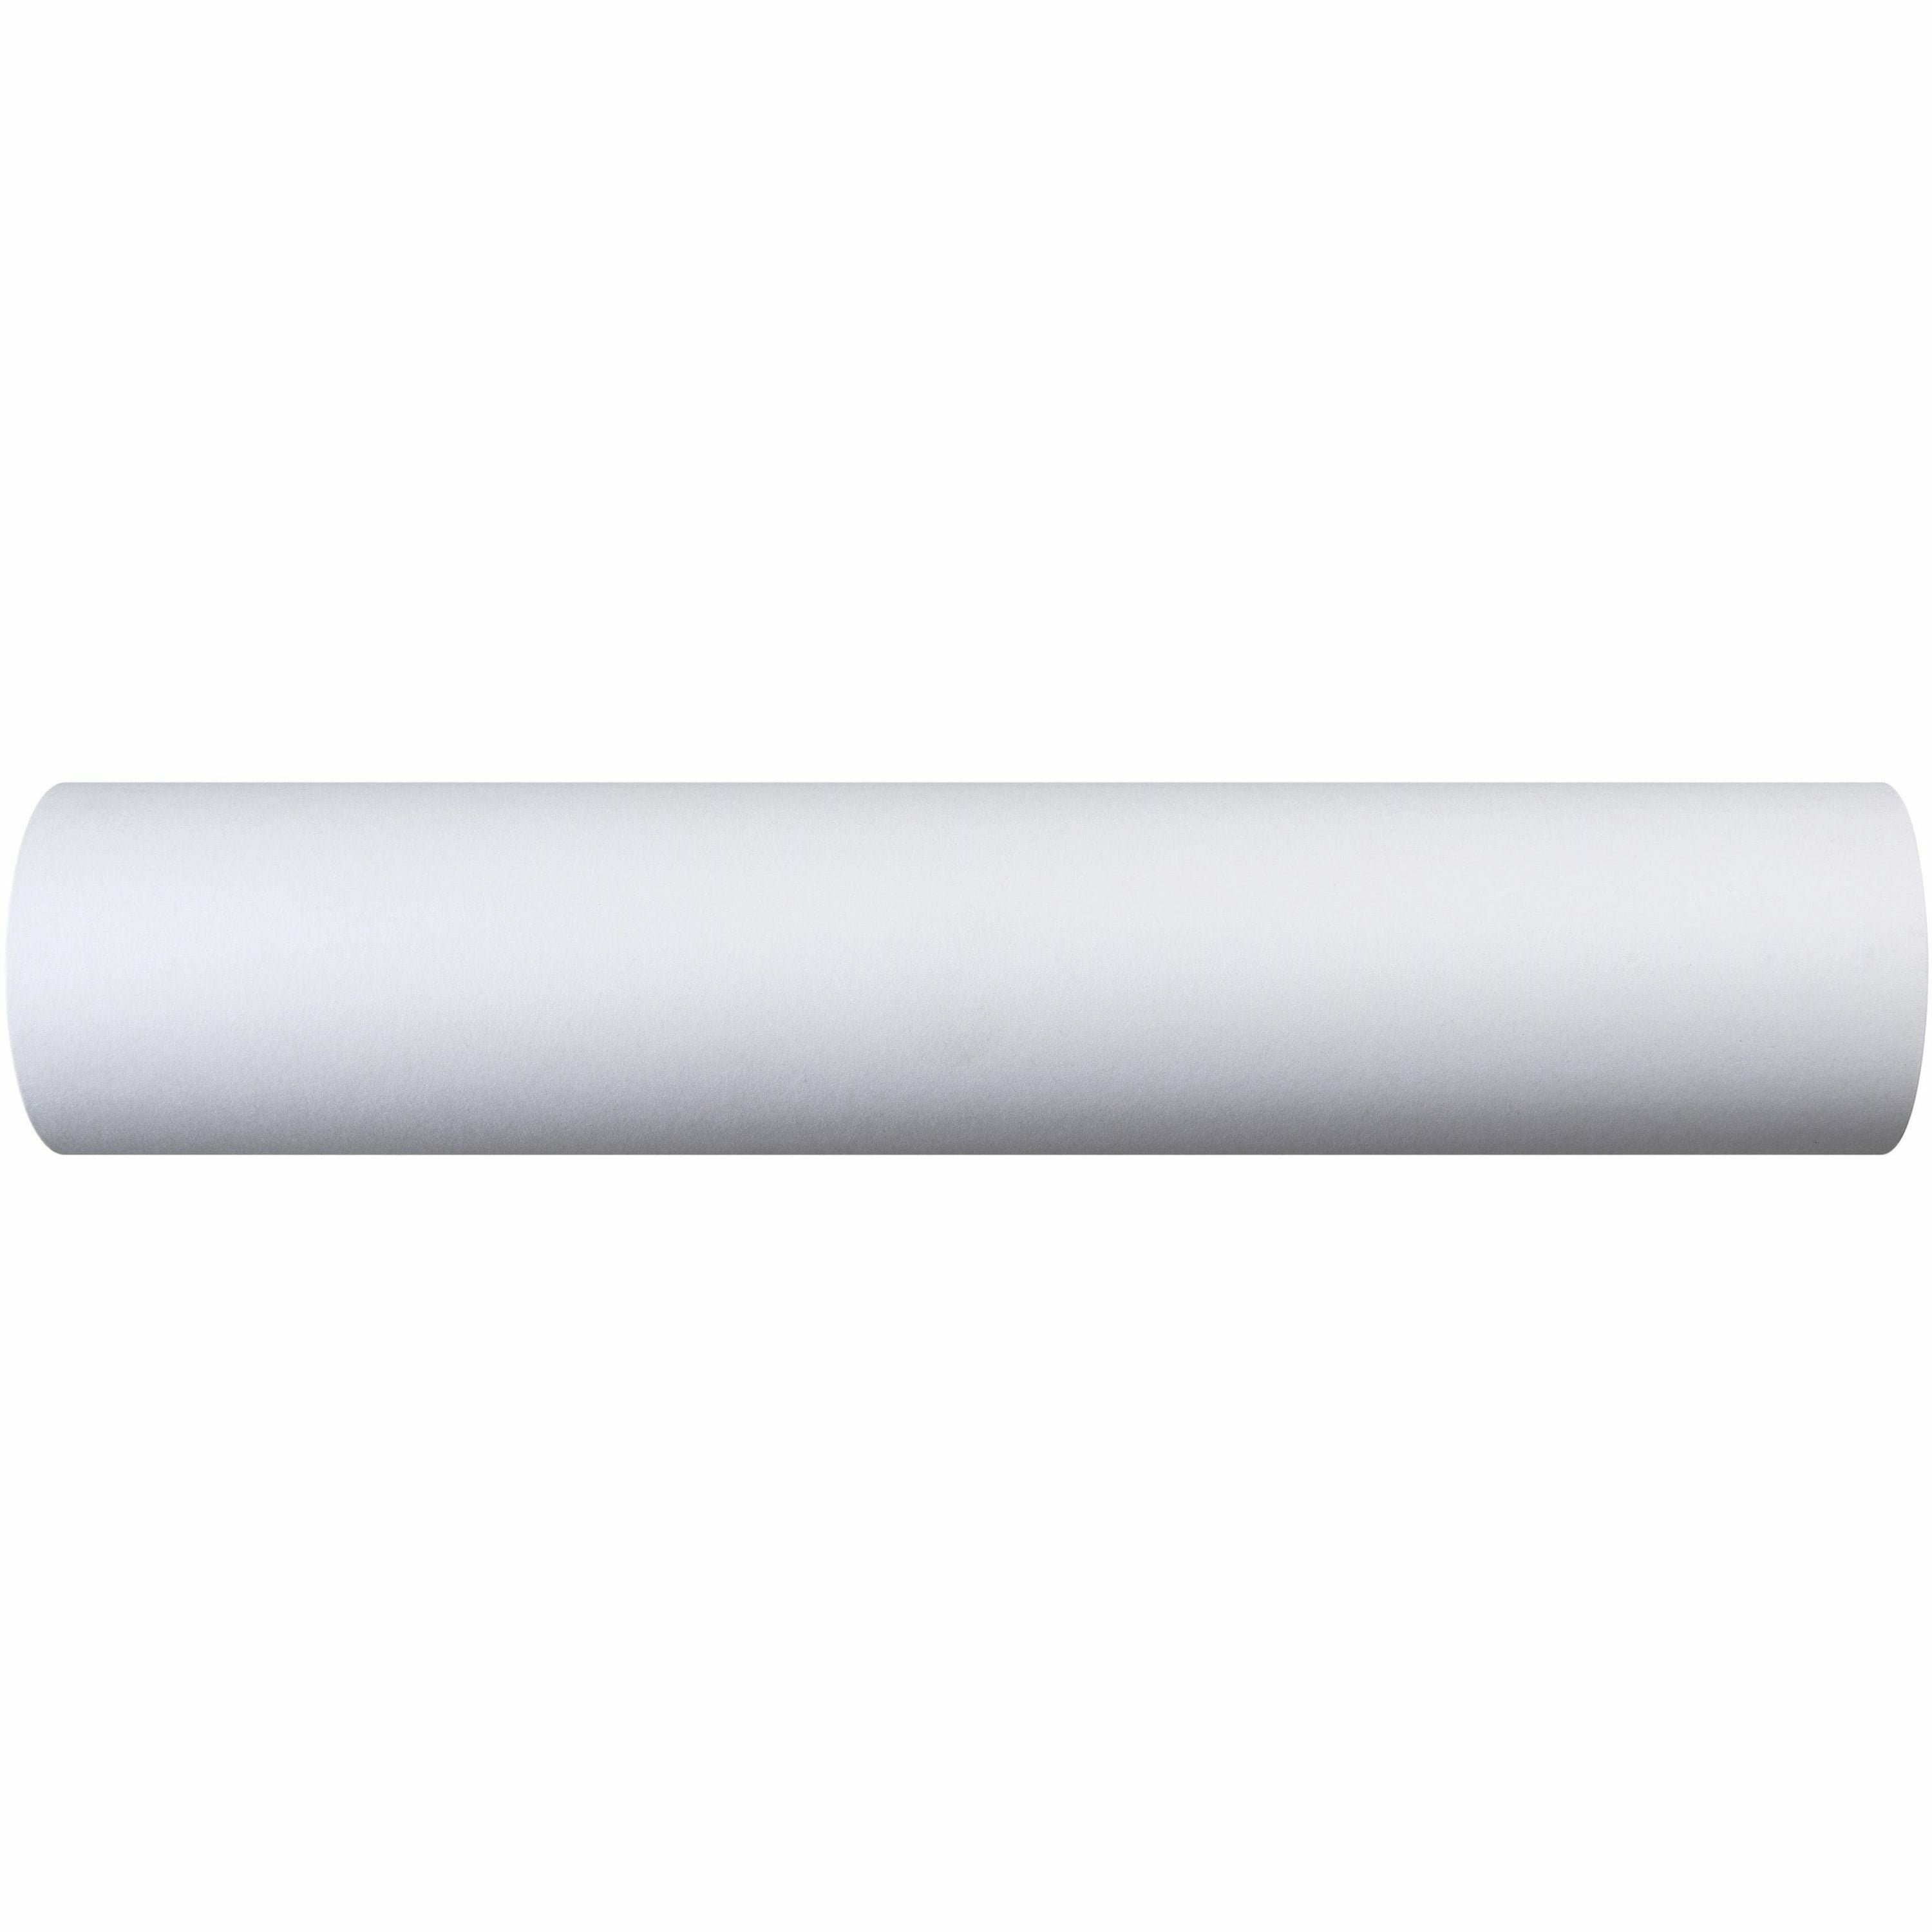 Pacon Easel Roll - 18" x 2400" - White Paper - Heavyweight - Recycled - 1 / Roll - 